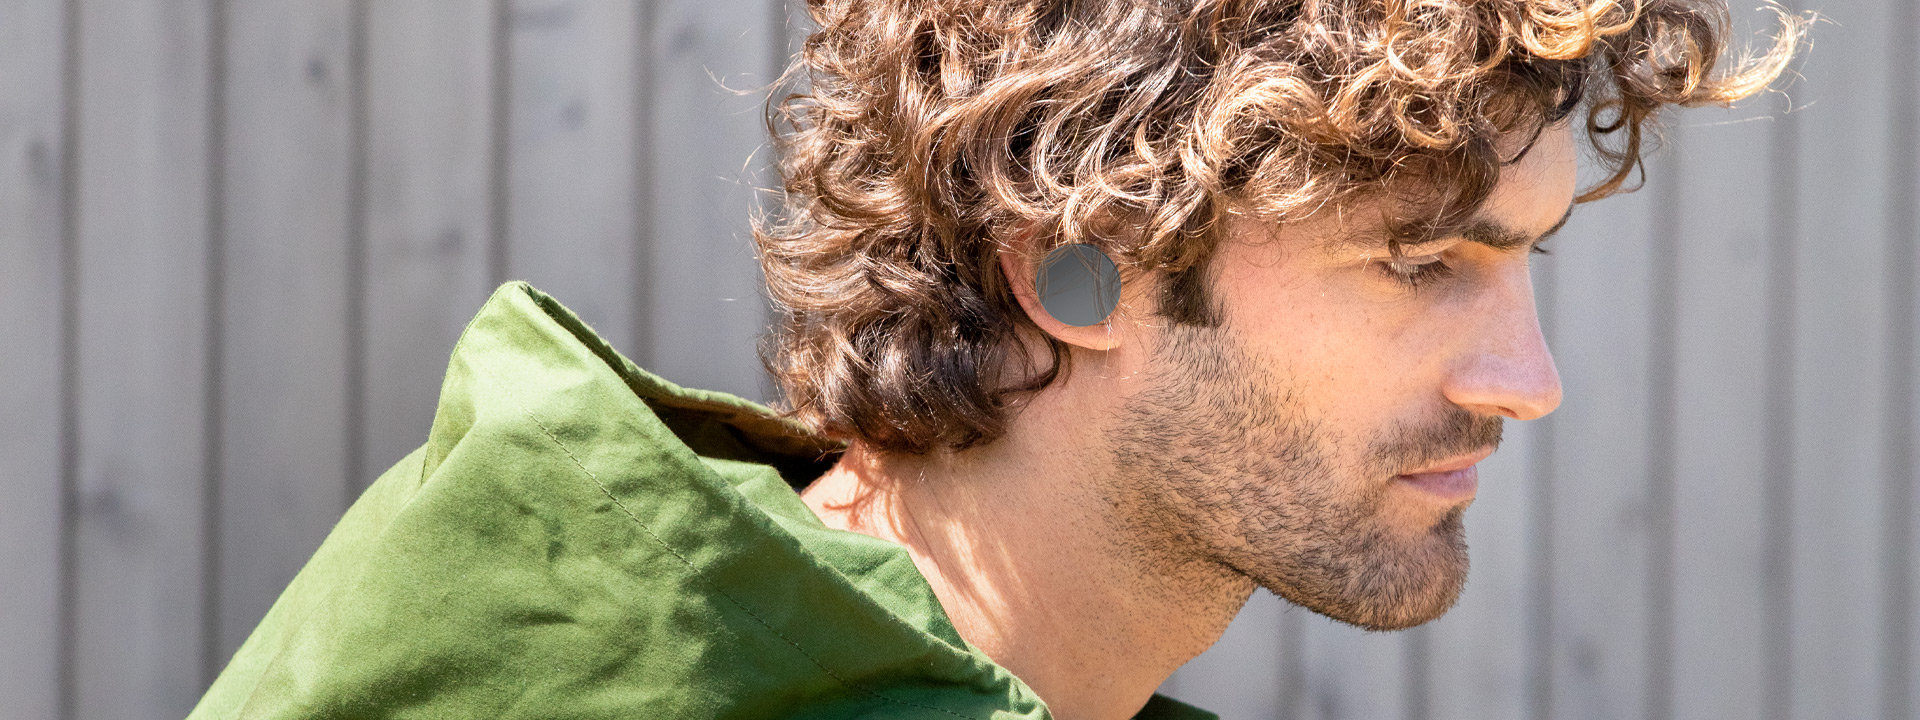 A man wears Surface Earbuds with ear tips in the perfect size for him.